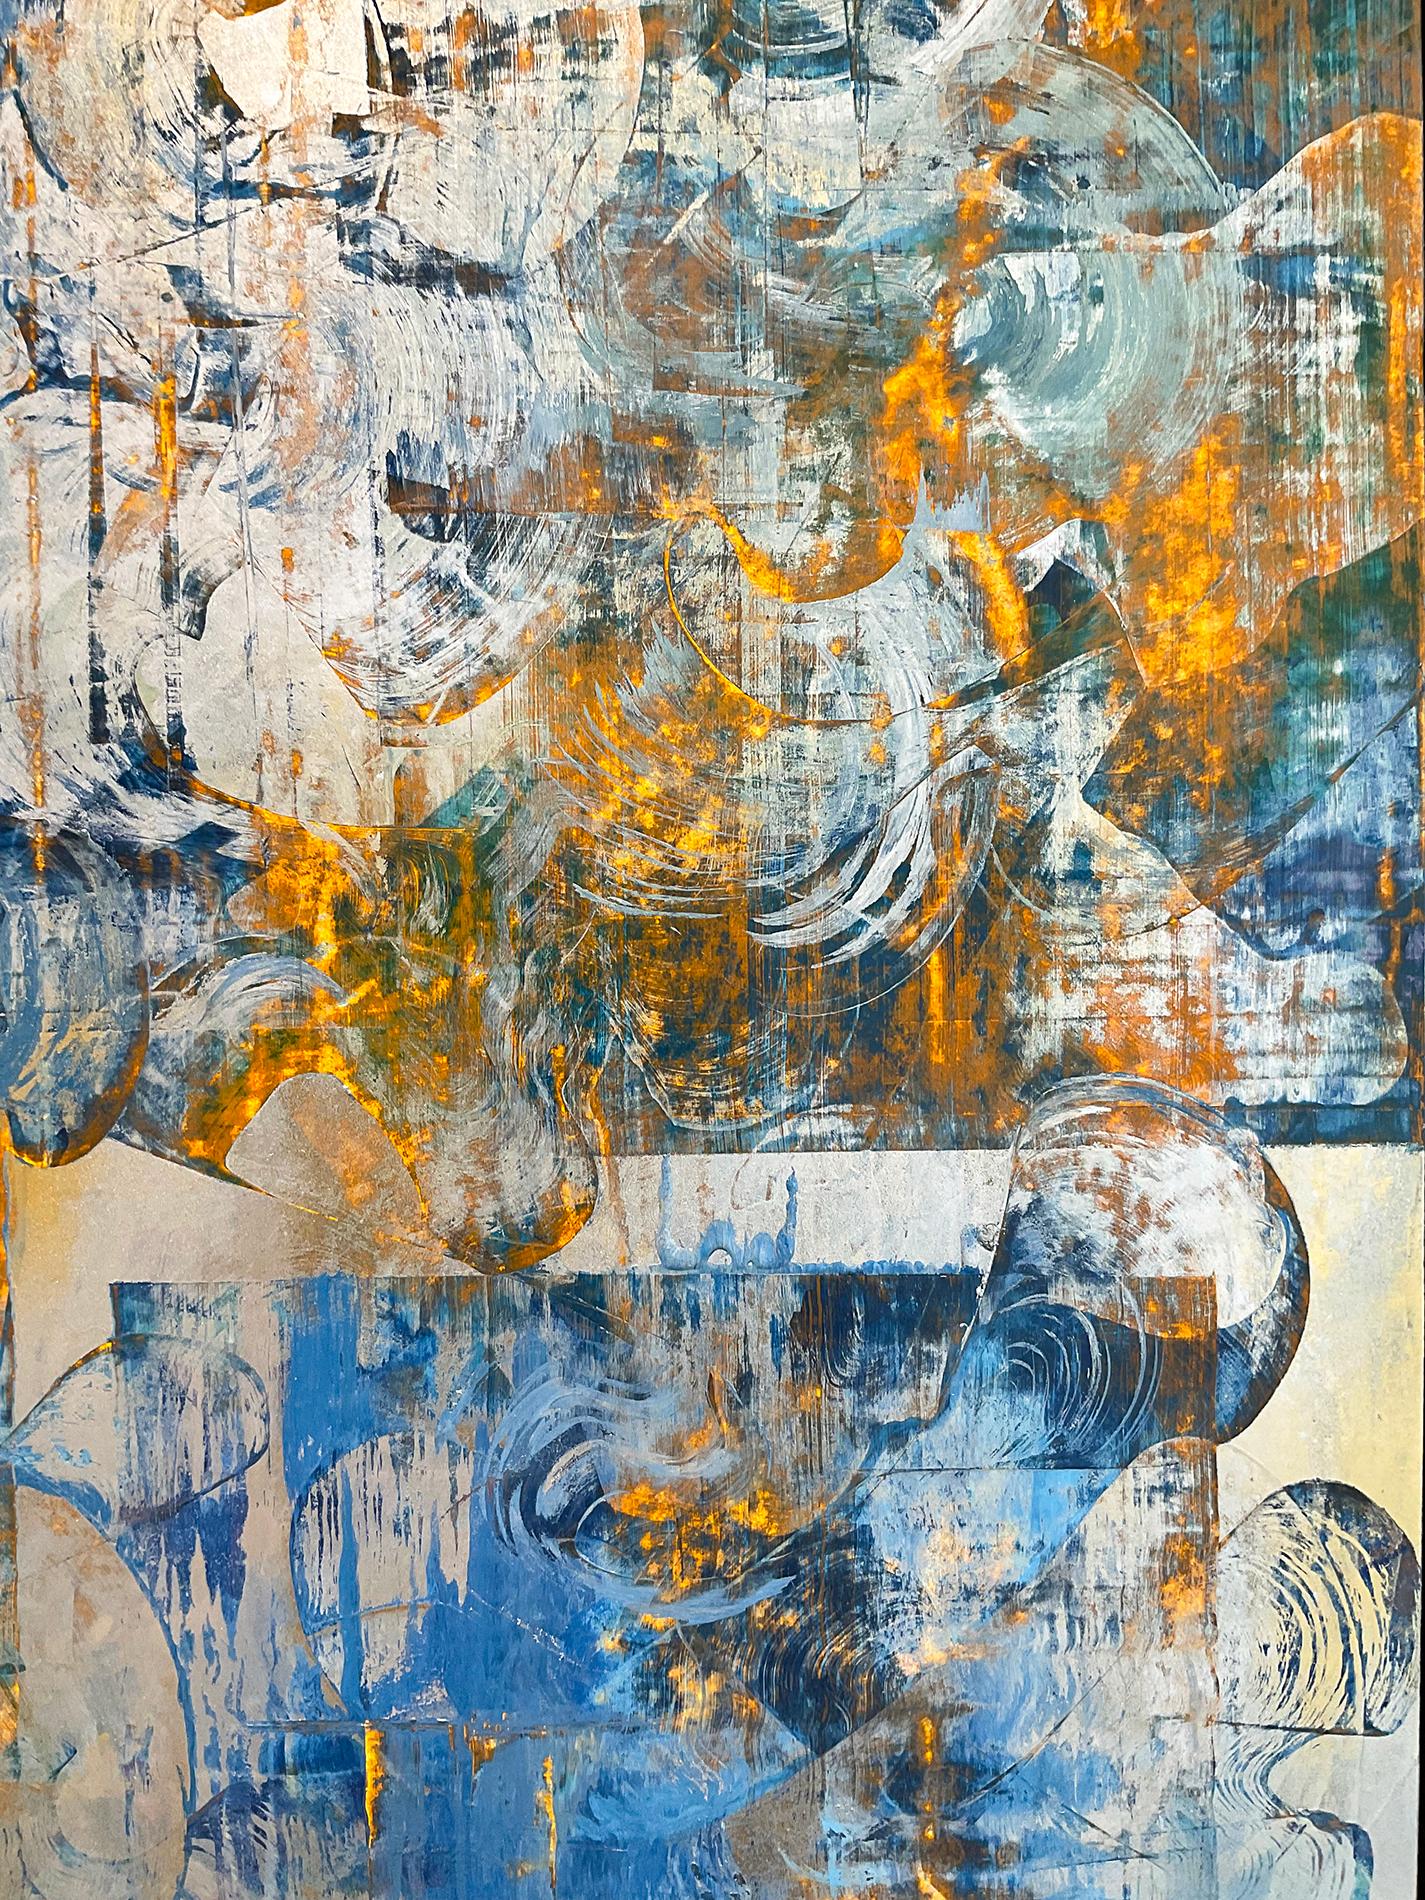 Right Now Is: Blue & Gold Abstract Painting in the Style of Gerhard Richter - Gray Abstract Drawing by Bruce Murphy